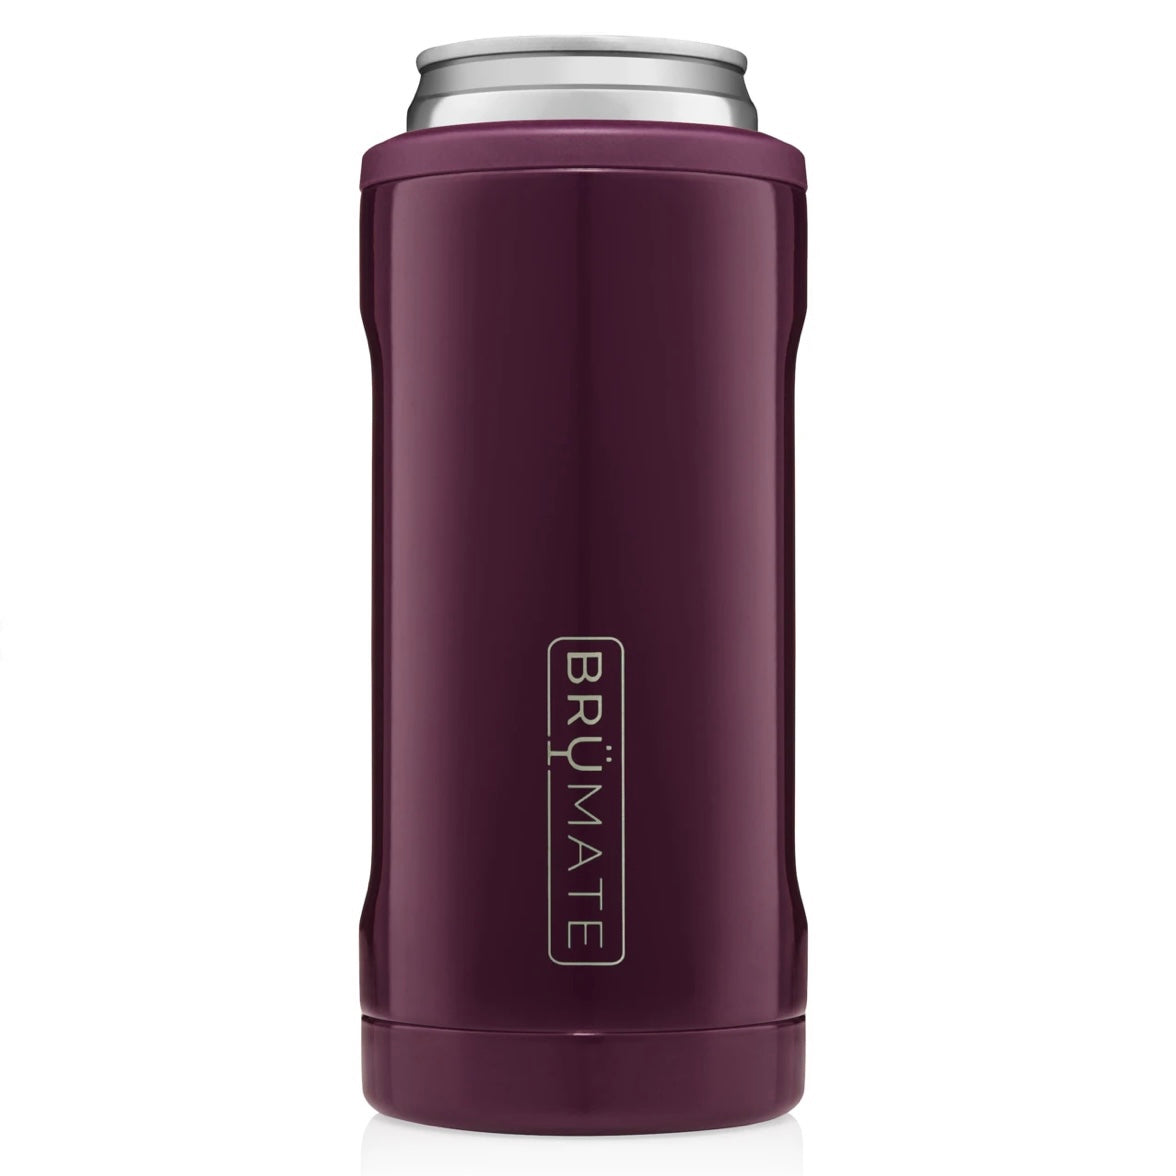 slim cans leak-proof drinkware hot to cold insulated drinkware tumbler like yeti brumate spillproof maroon